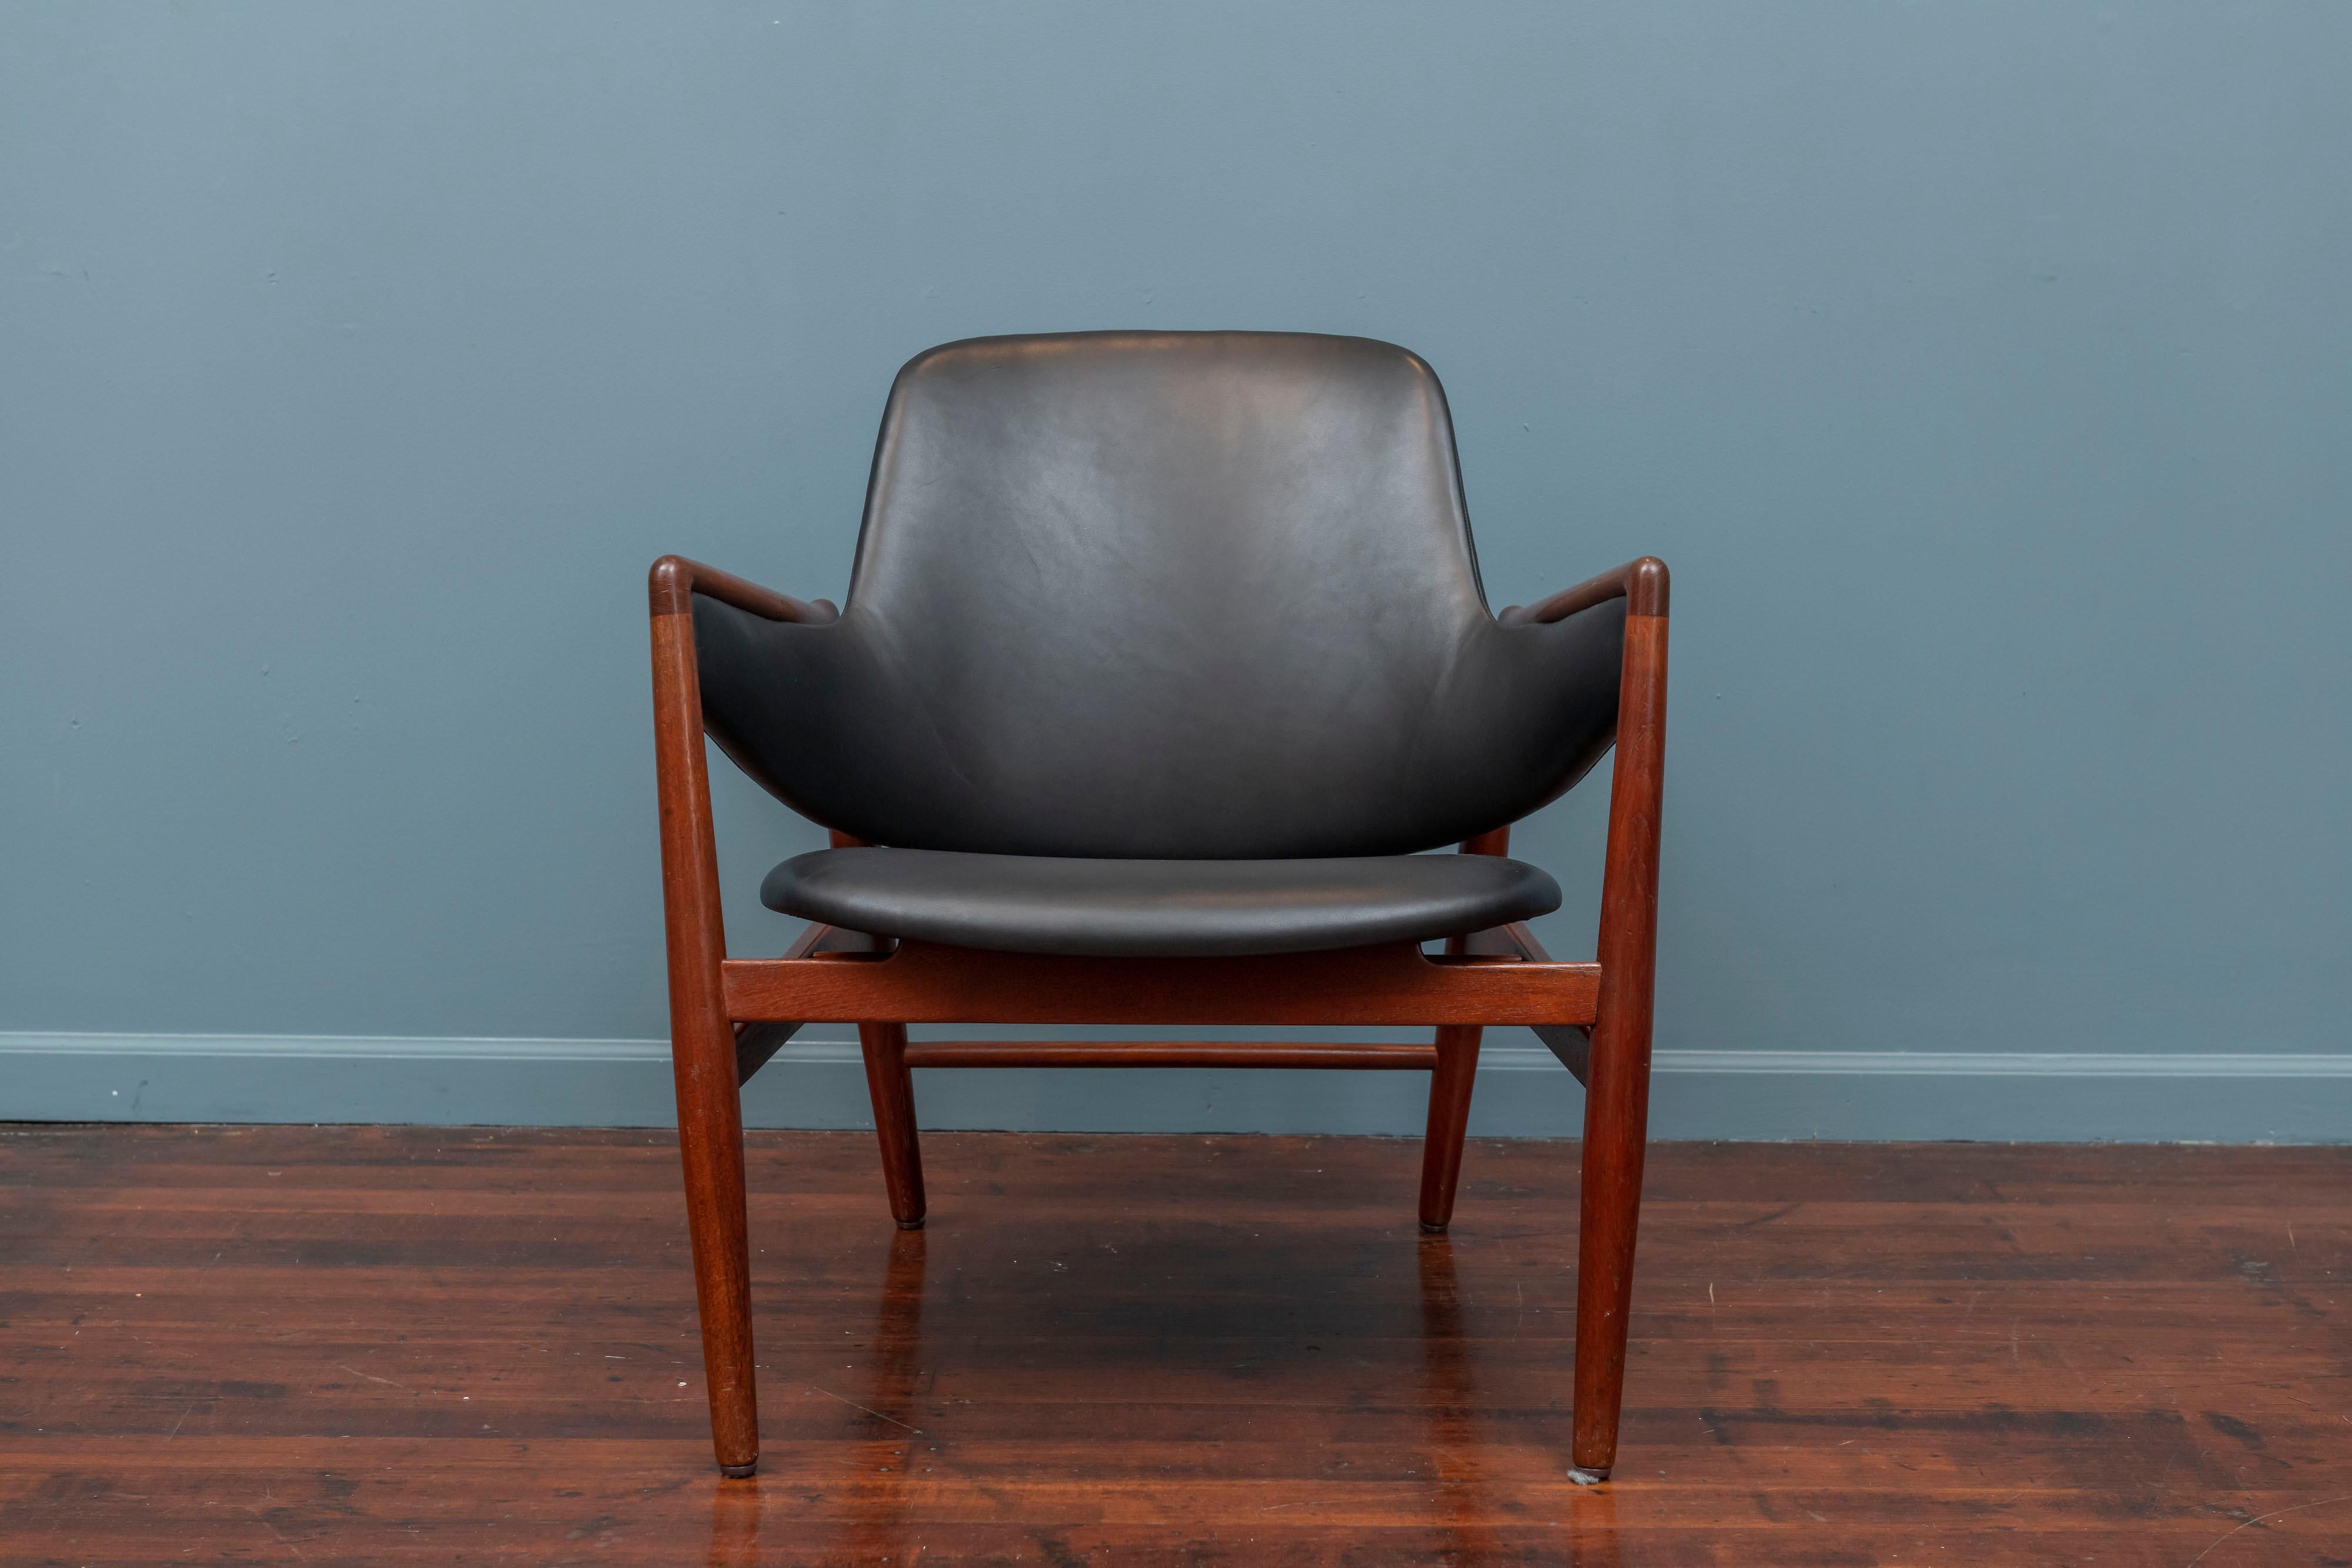 Rare Ib Kofod-Larsen design lounge chair for Christen & Larsen, Denmark. Very low production chair model, fully documented in 40 years of Danish furniture design catalog.
 Newly waxed teak frame and upholstered in new black leather, very comfy and